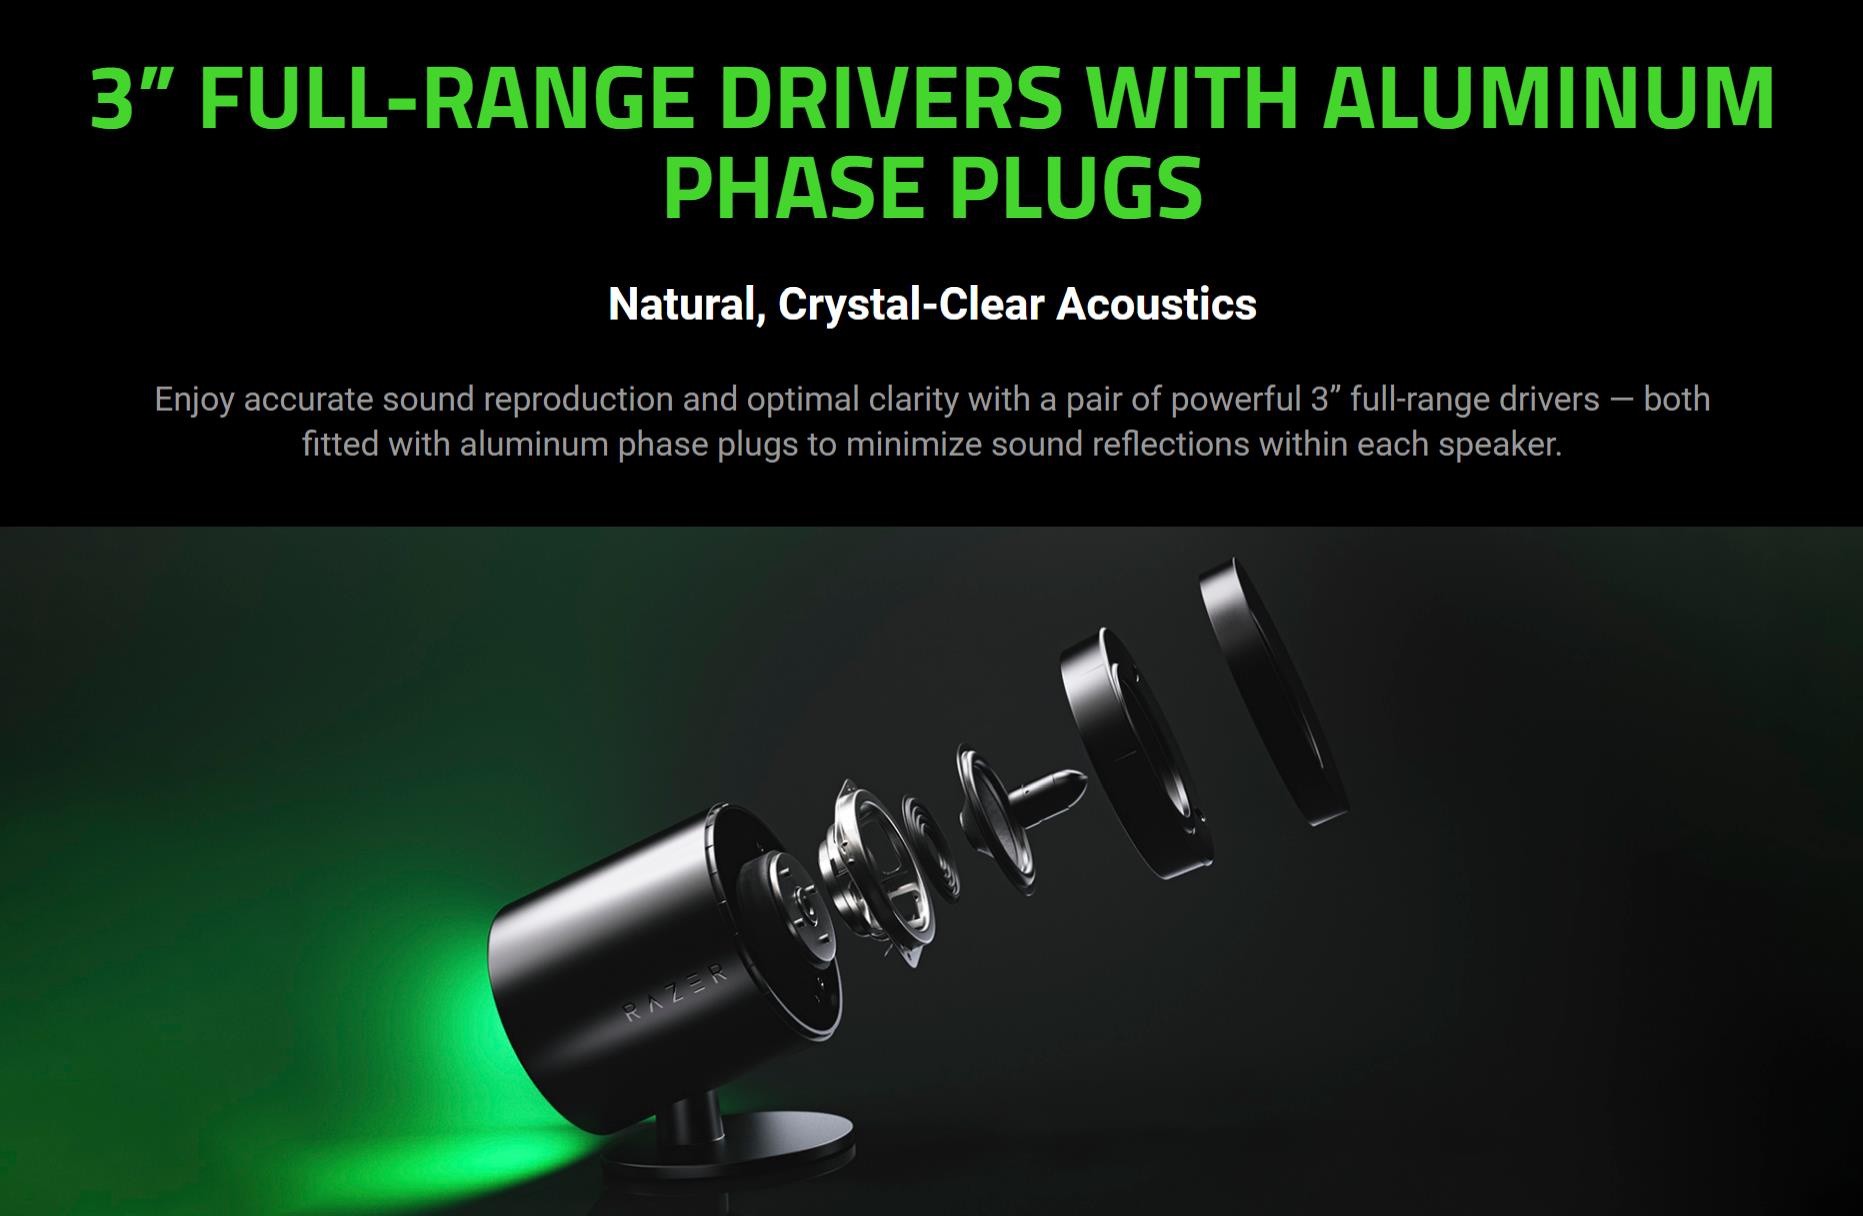 A large marketing image providing additional information about the product Razer Nommo V2 - Full-Range 2.1 PC Gaming Speakers with Wired Subwoofer  - Additional alt info not provided